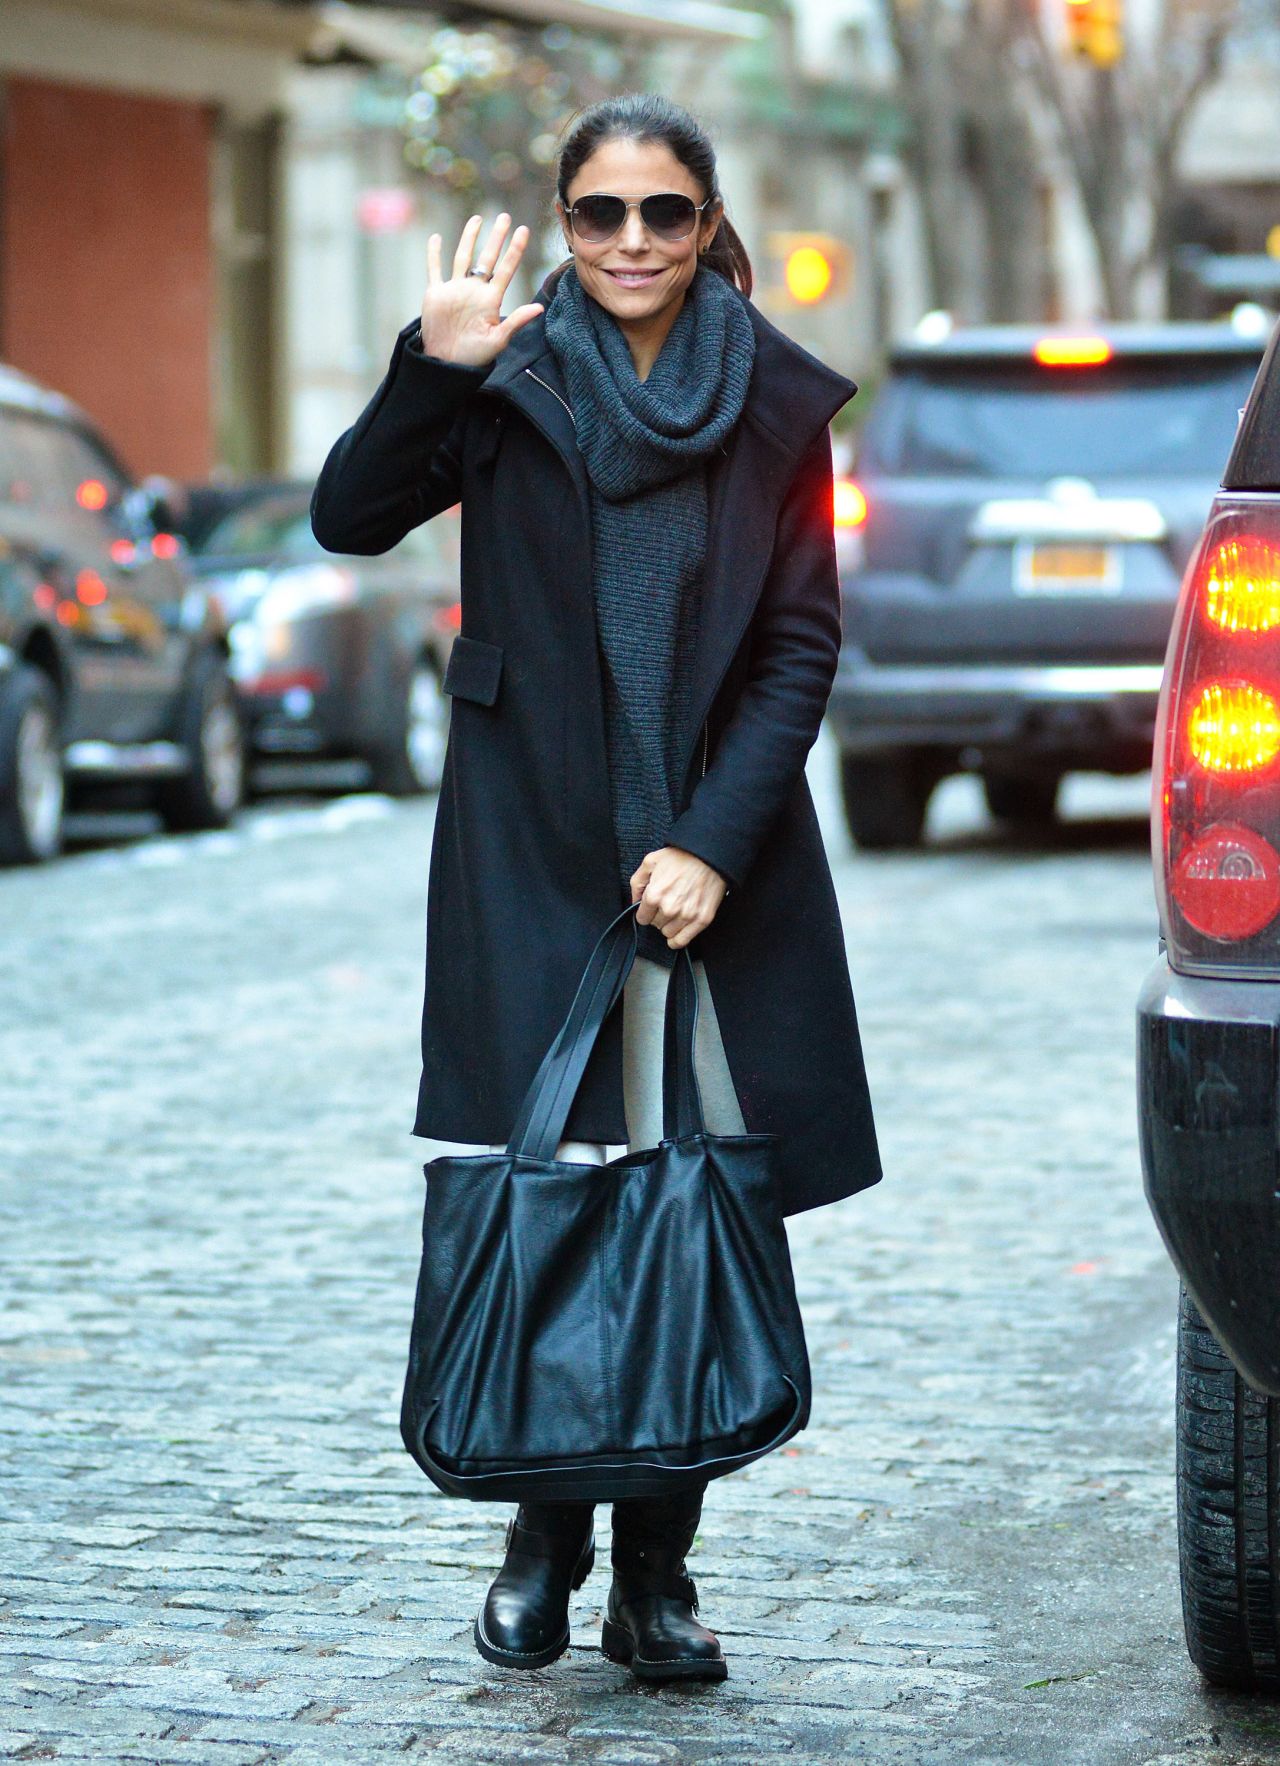 Bethenny Frankel is in good spirits when she spots photographers on December 18. 